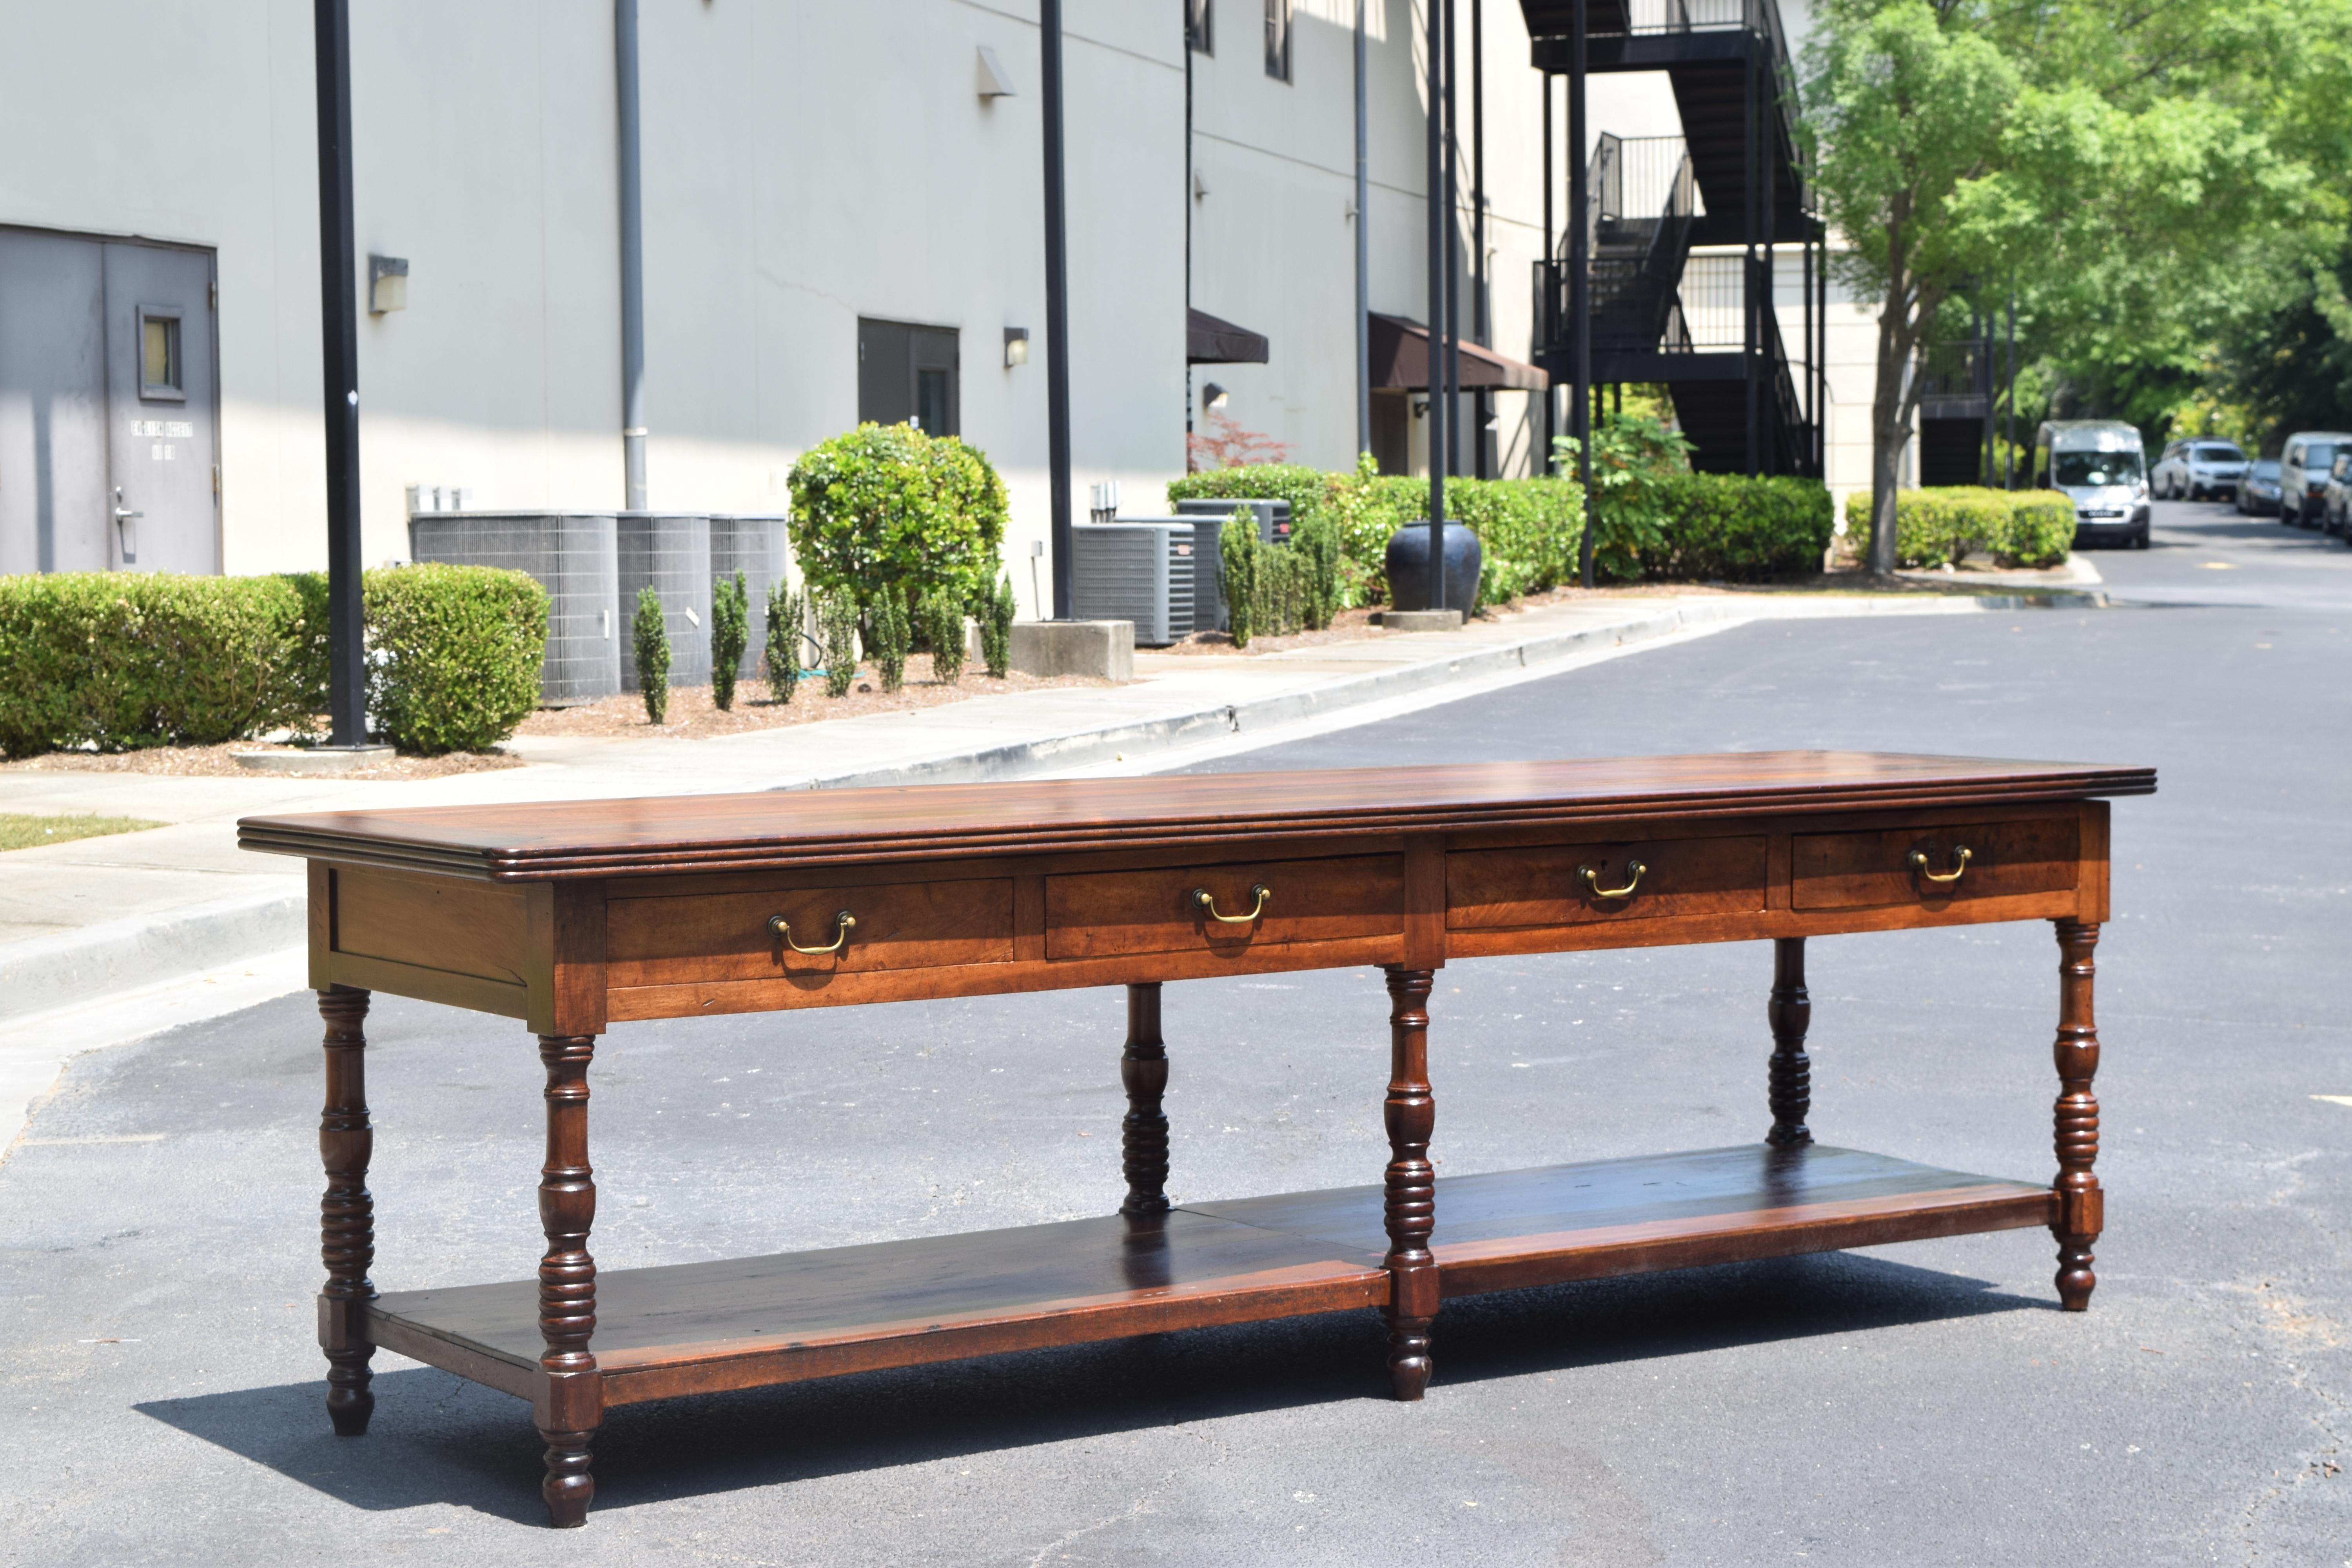 constructed entirely of beautifully grained light walnu this shaped and carved drapers table has four drawers retaining antique bronze handles, with a lower shelf used to hold bolts of fabric and acting as a stretcher for the six turned legs,